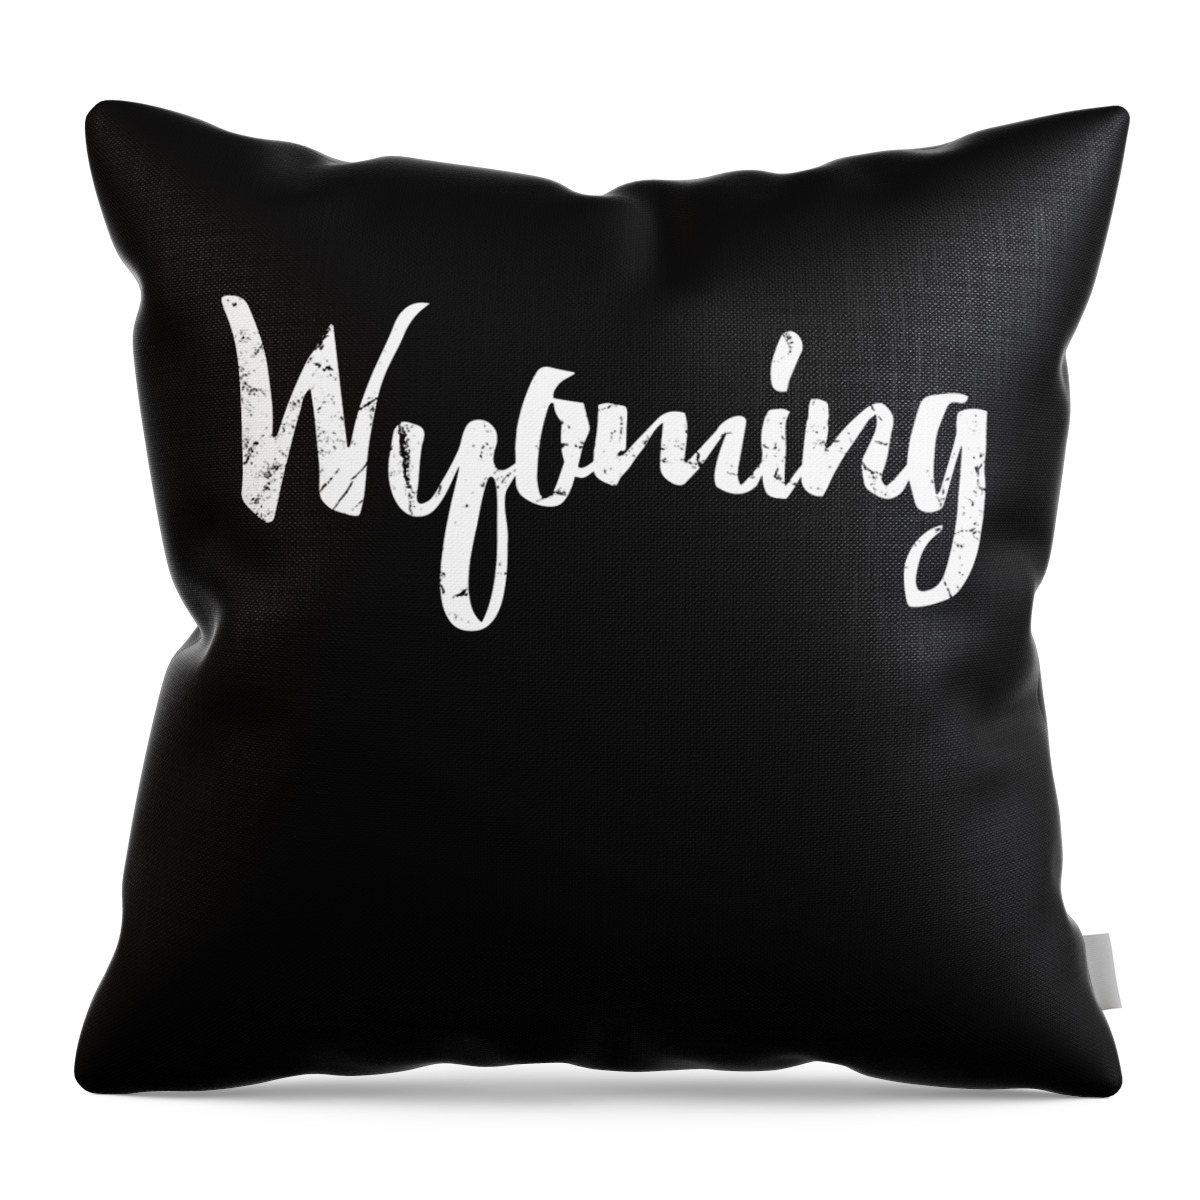 Funny Throw Pillow featuring the digital art Wyoming by Flippin Sweet Gear